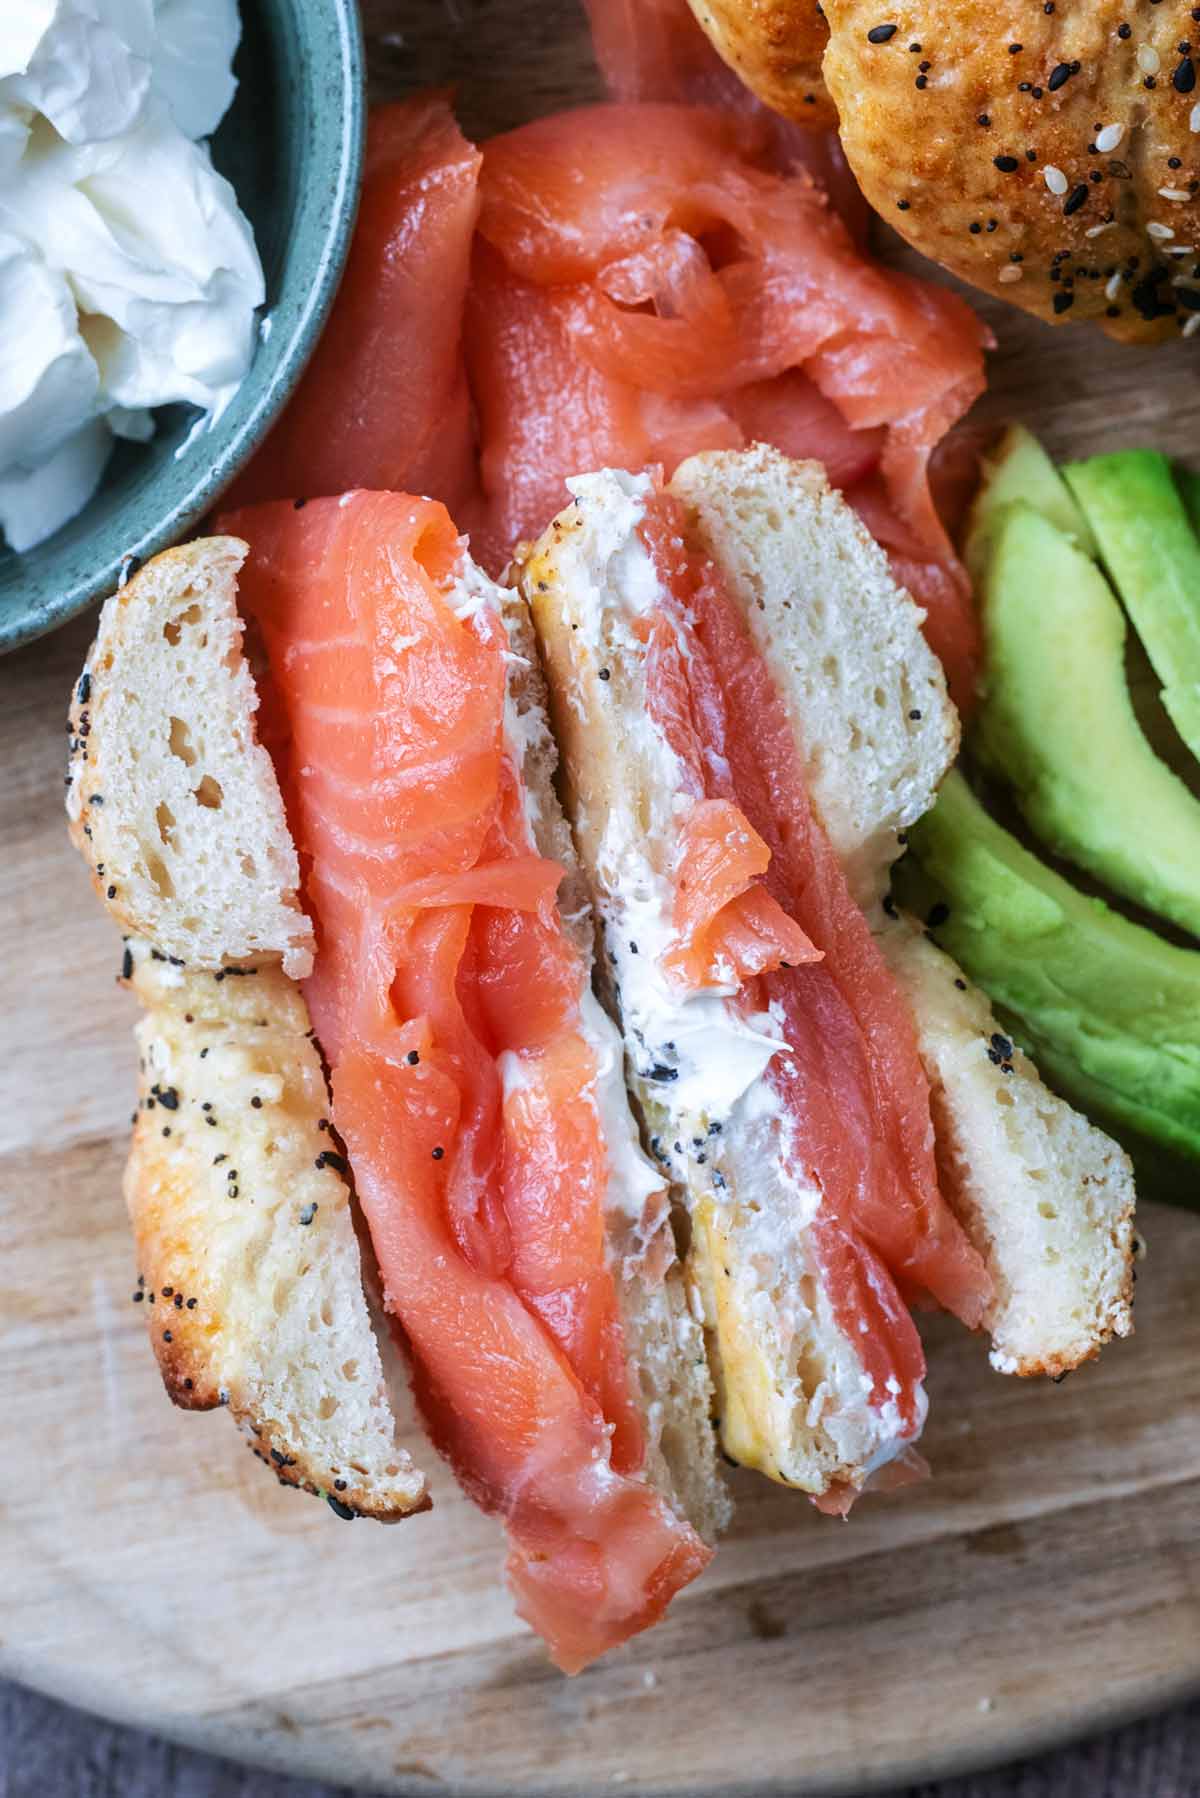 A cream cheese and smoked salmon bagel sliced in half showing the insides.